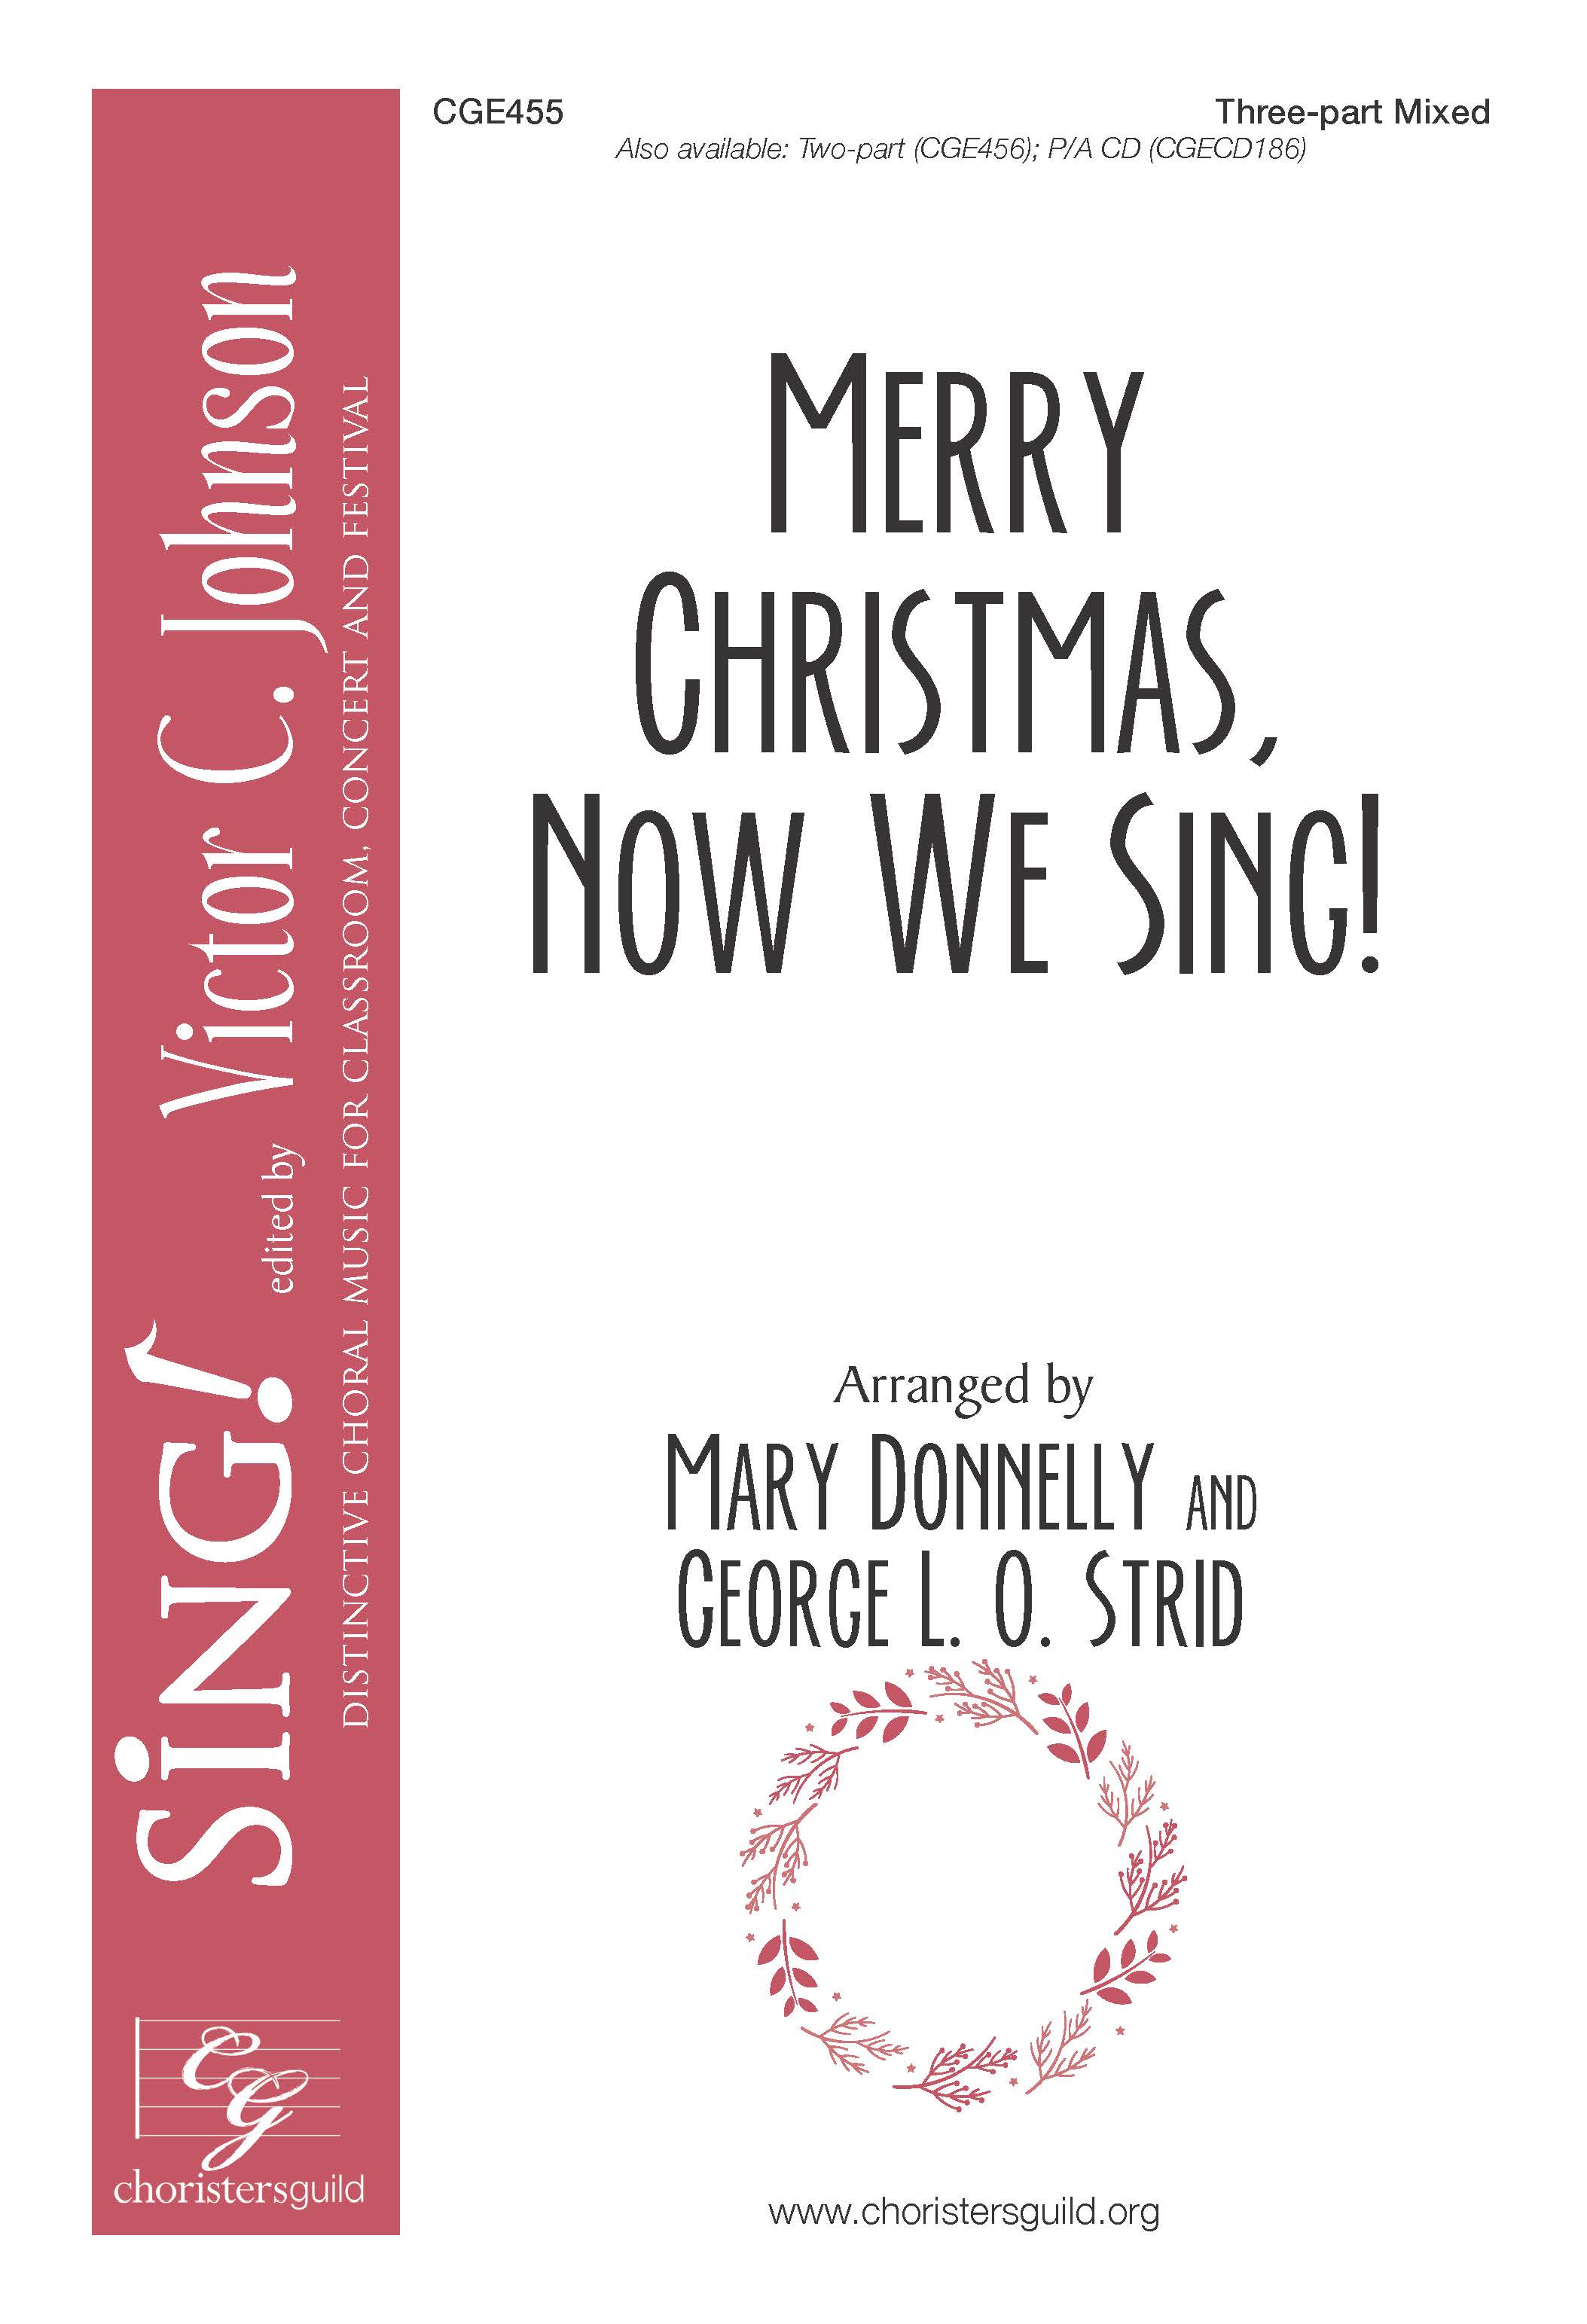 Merry Christmas, Now We Sing - Three-part Mixed